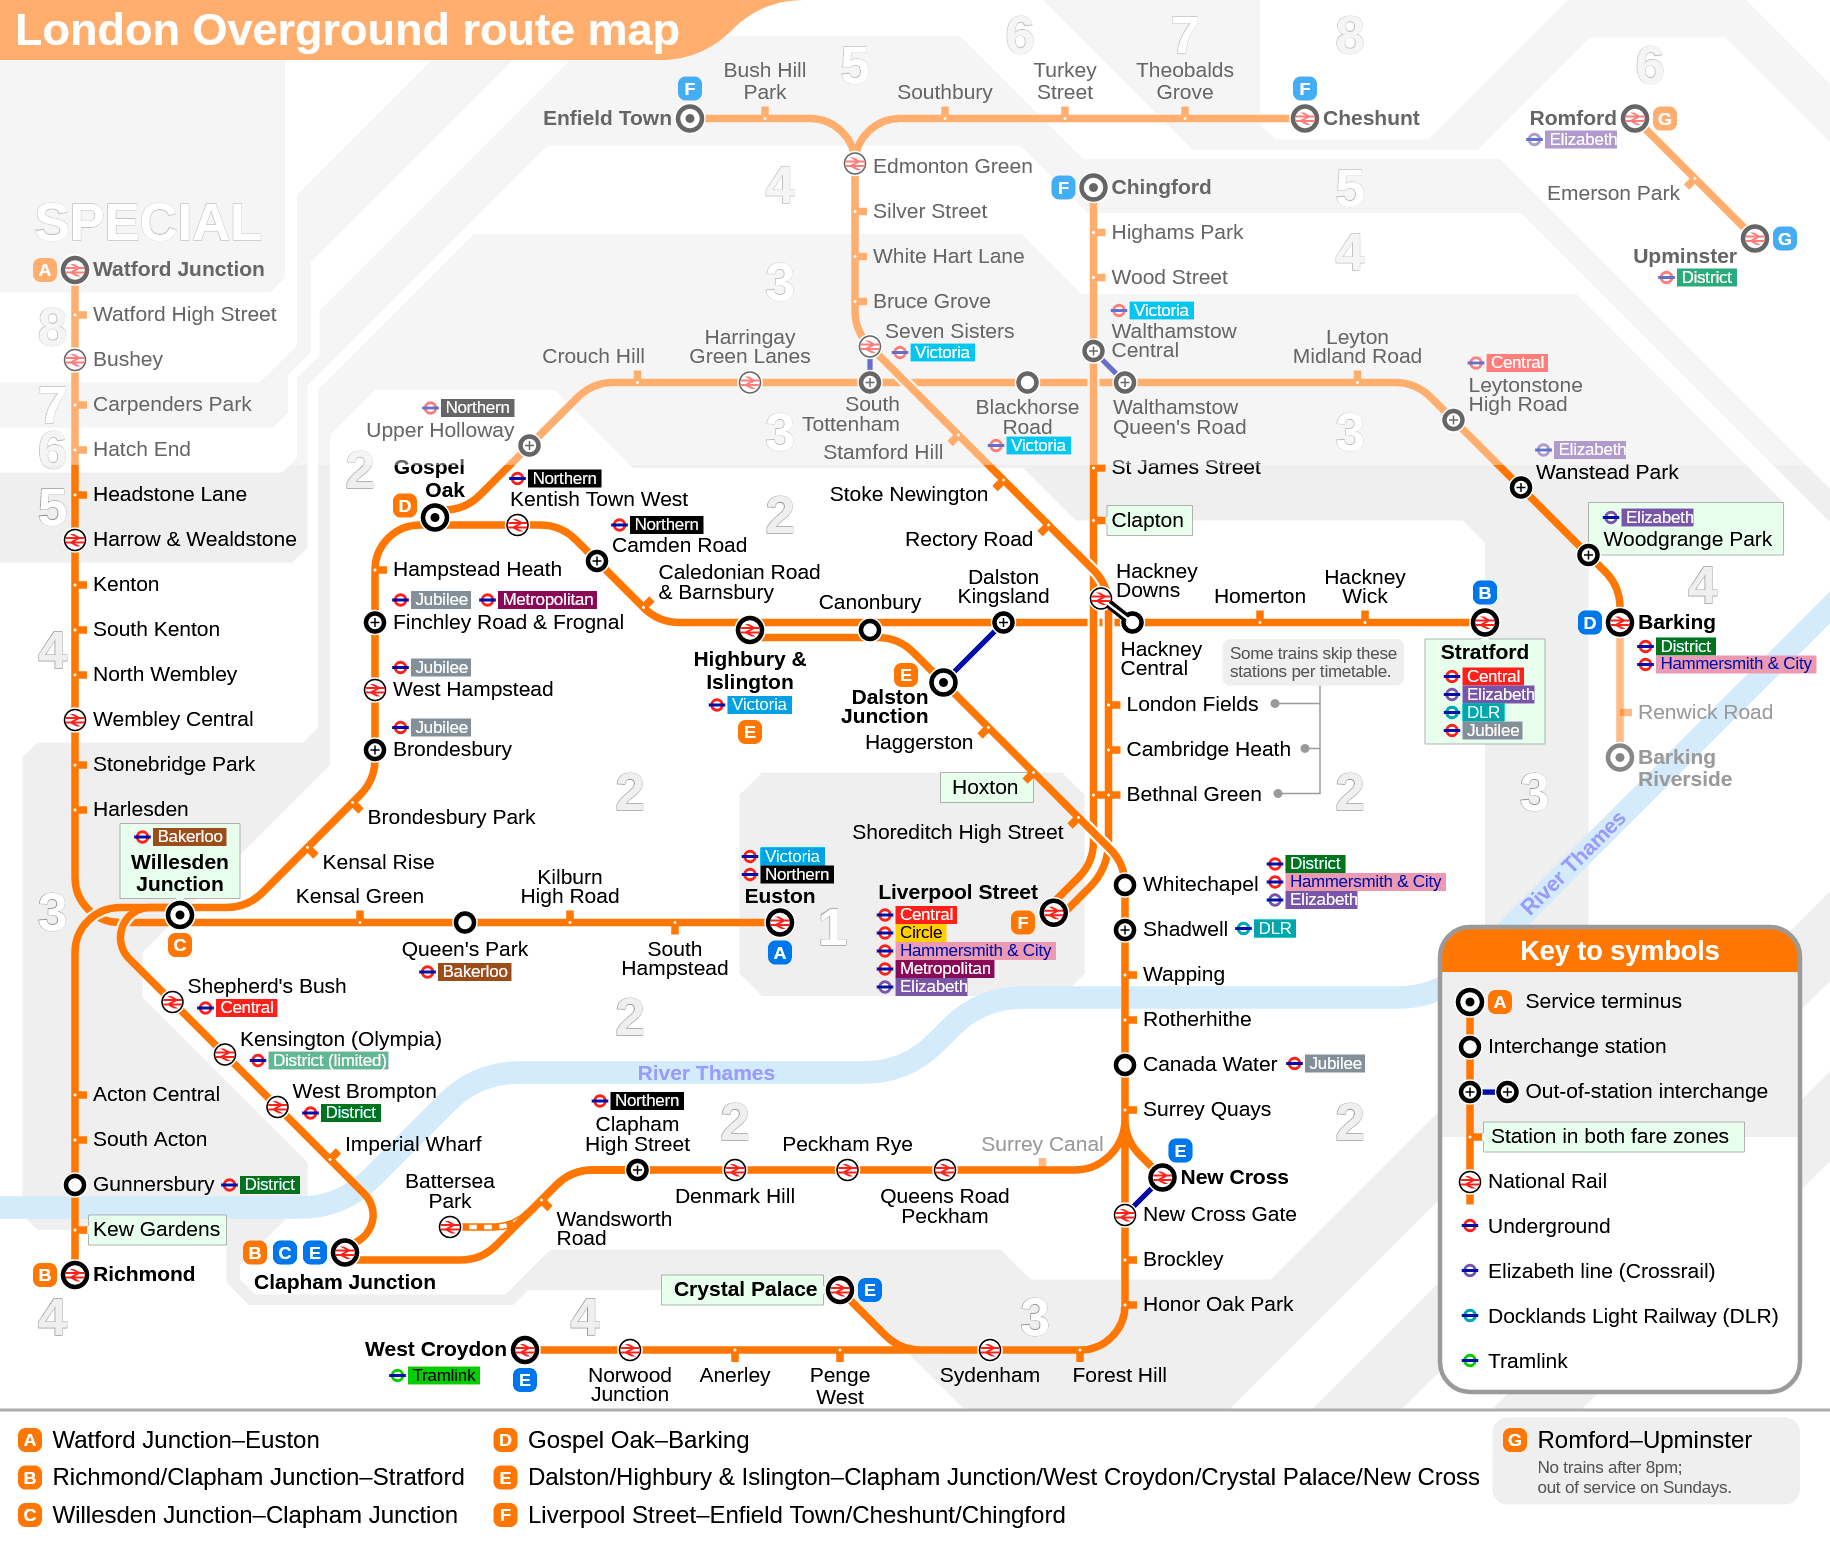 London Overground lines routes map